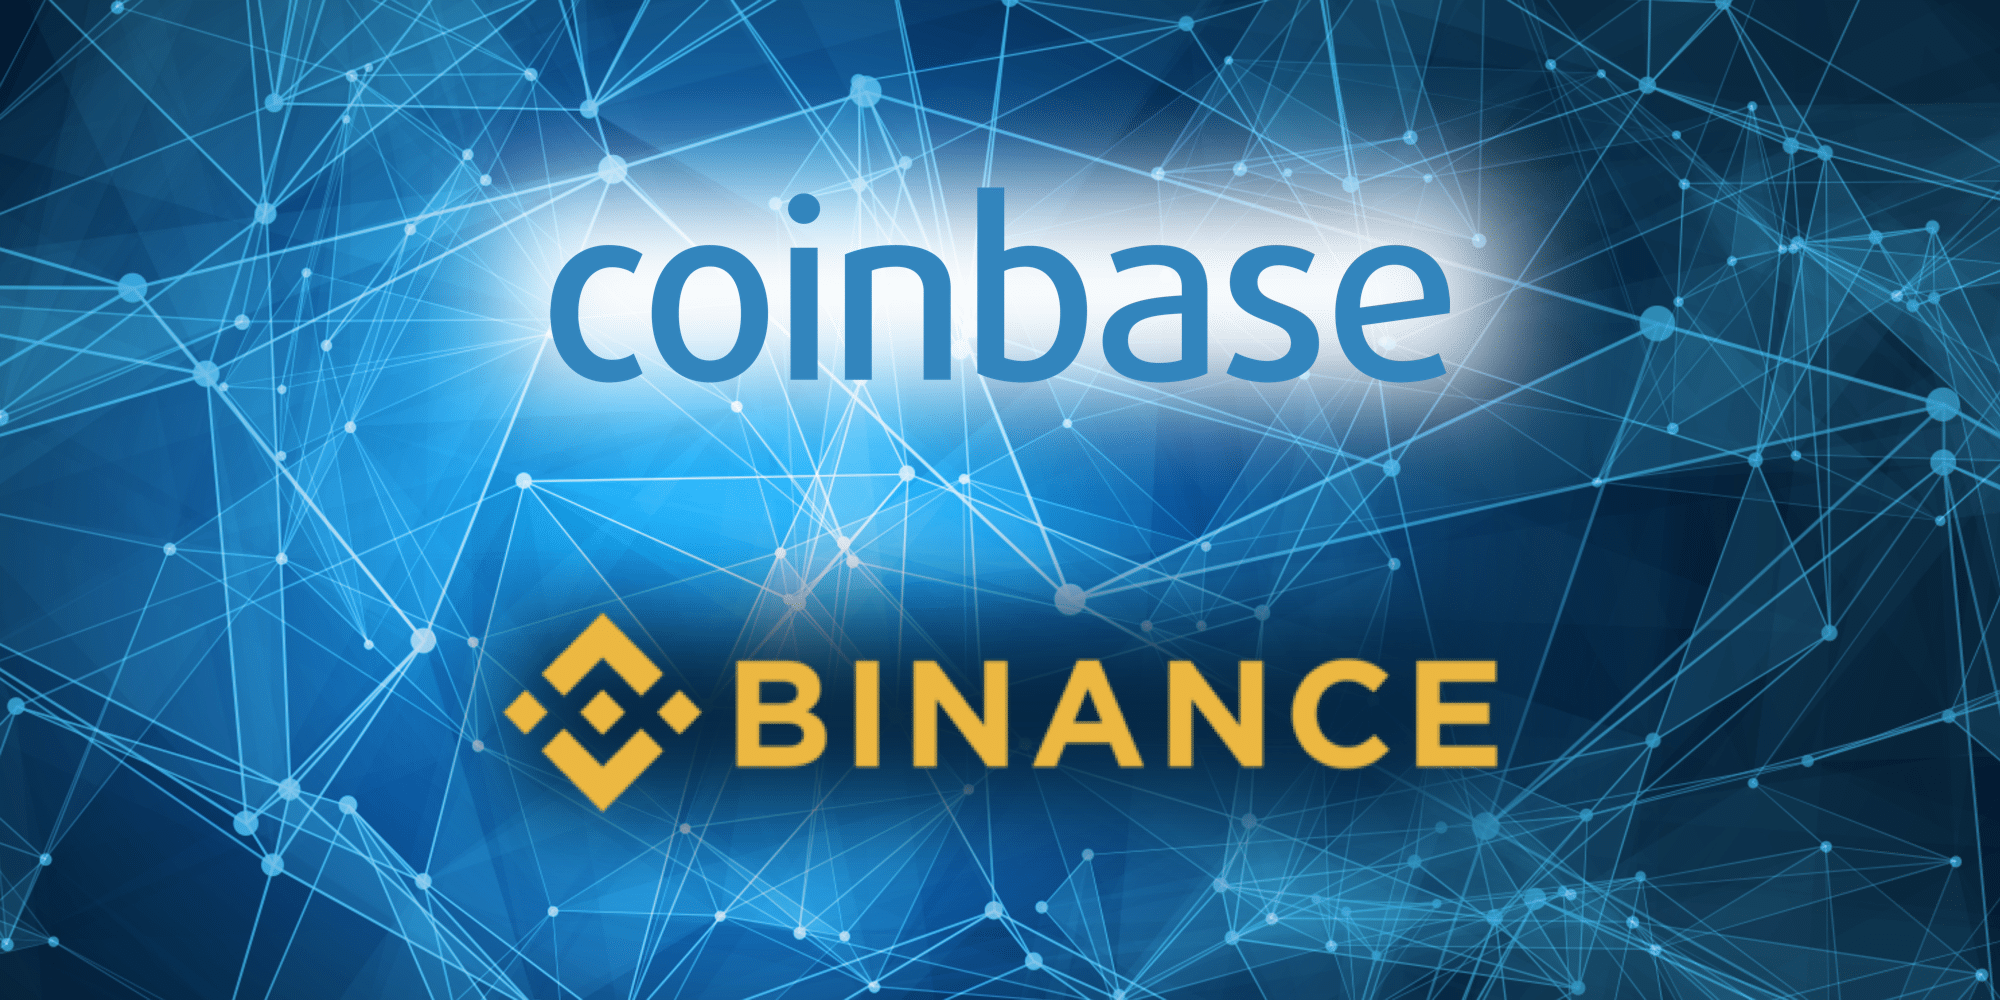 how can i transfer from binance to coinbase